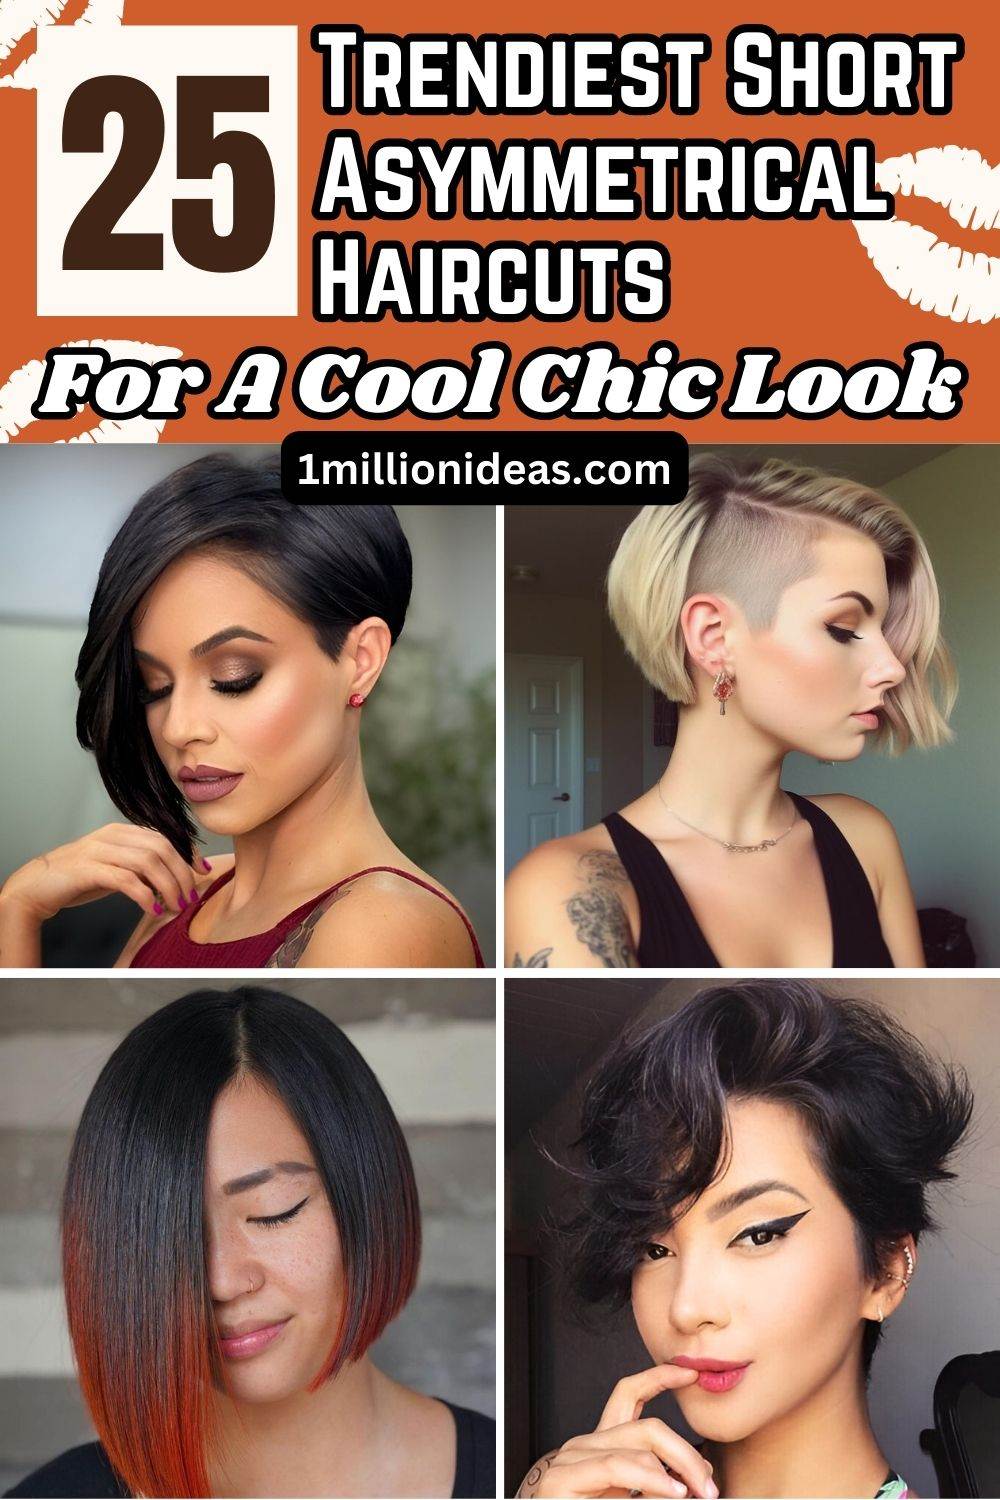 25 Trendiest Short Asymmetrical Haircuts For A Cool Chic Look - 161